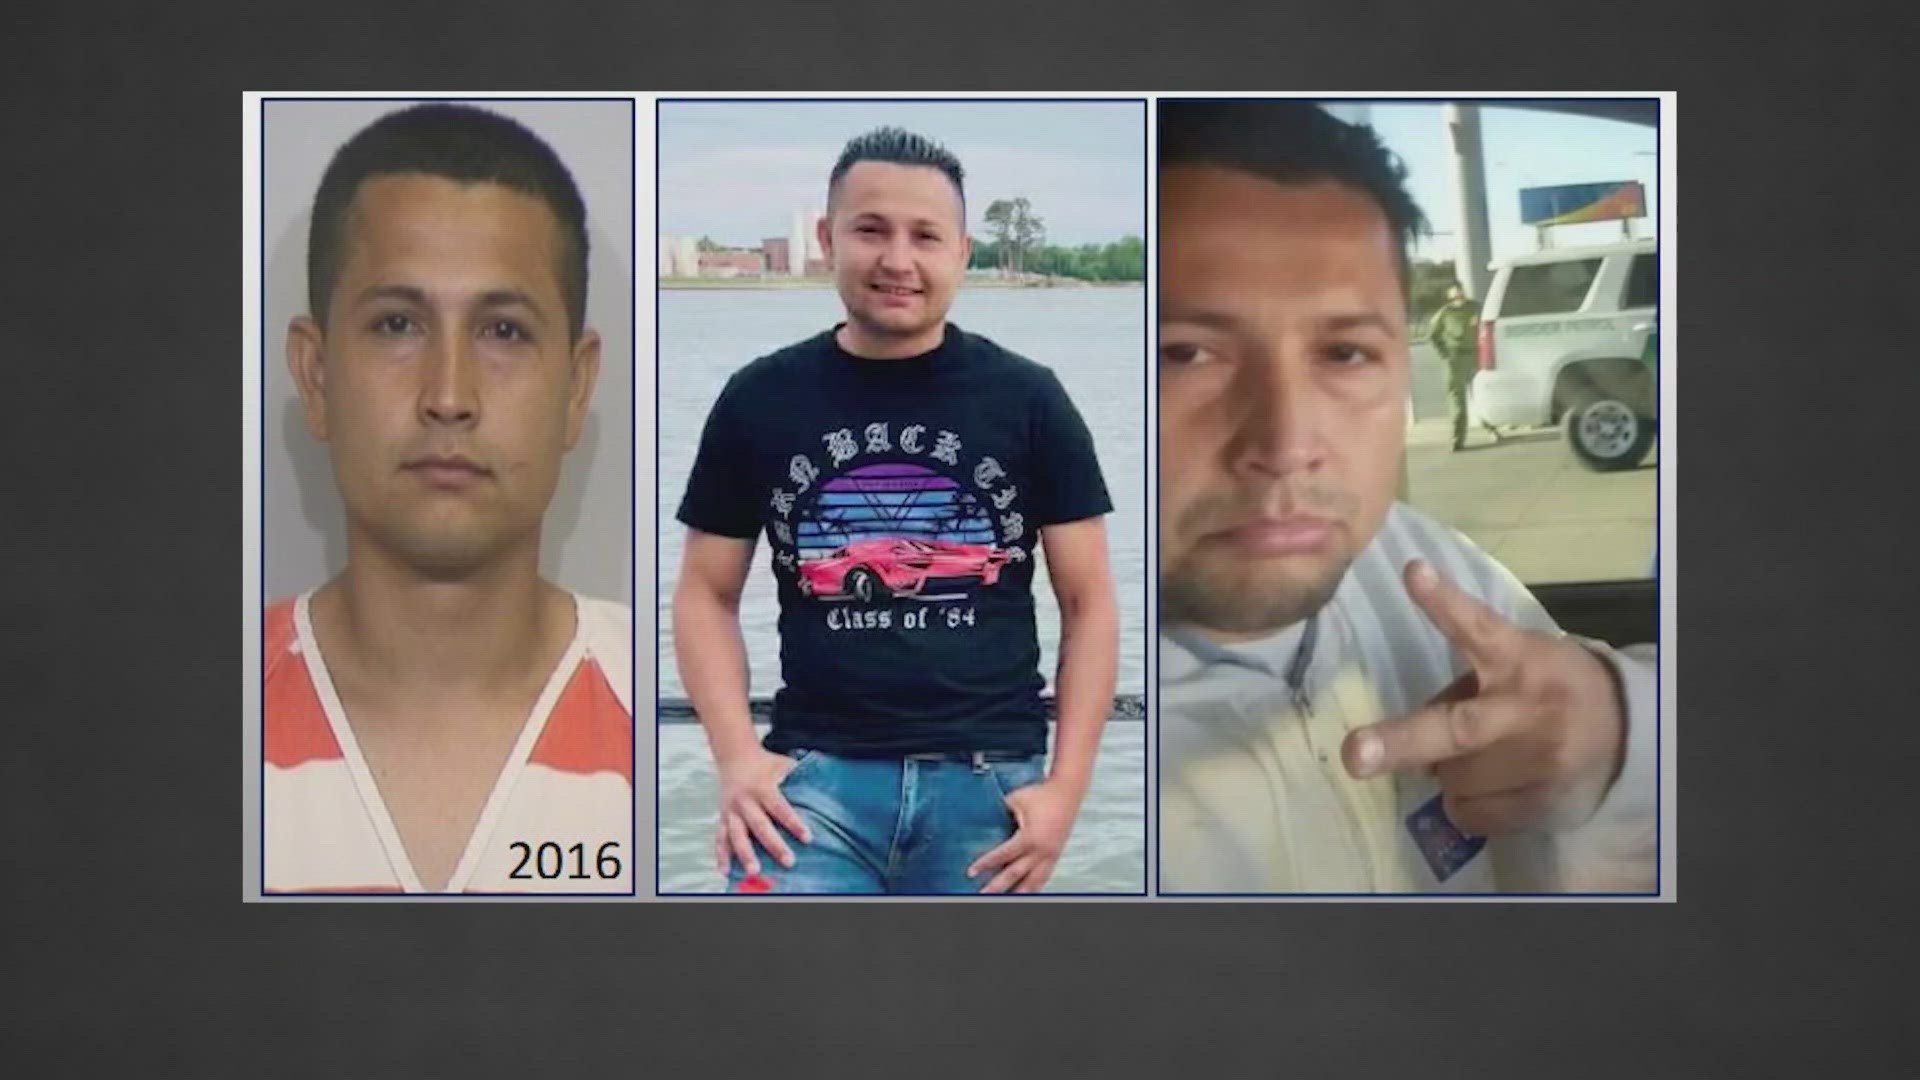 Irving police are looking for 32-year-old Hector Matute who also uses the alias Hector Paguada.